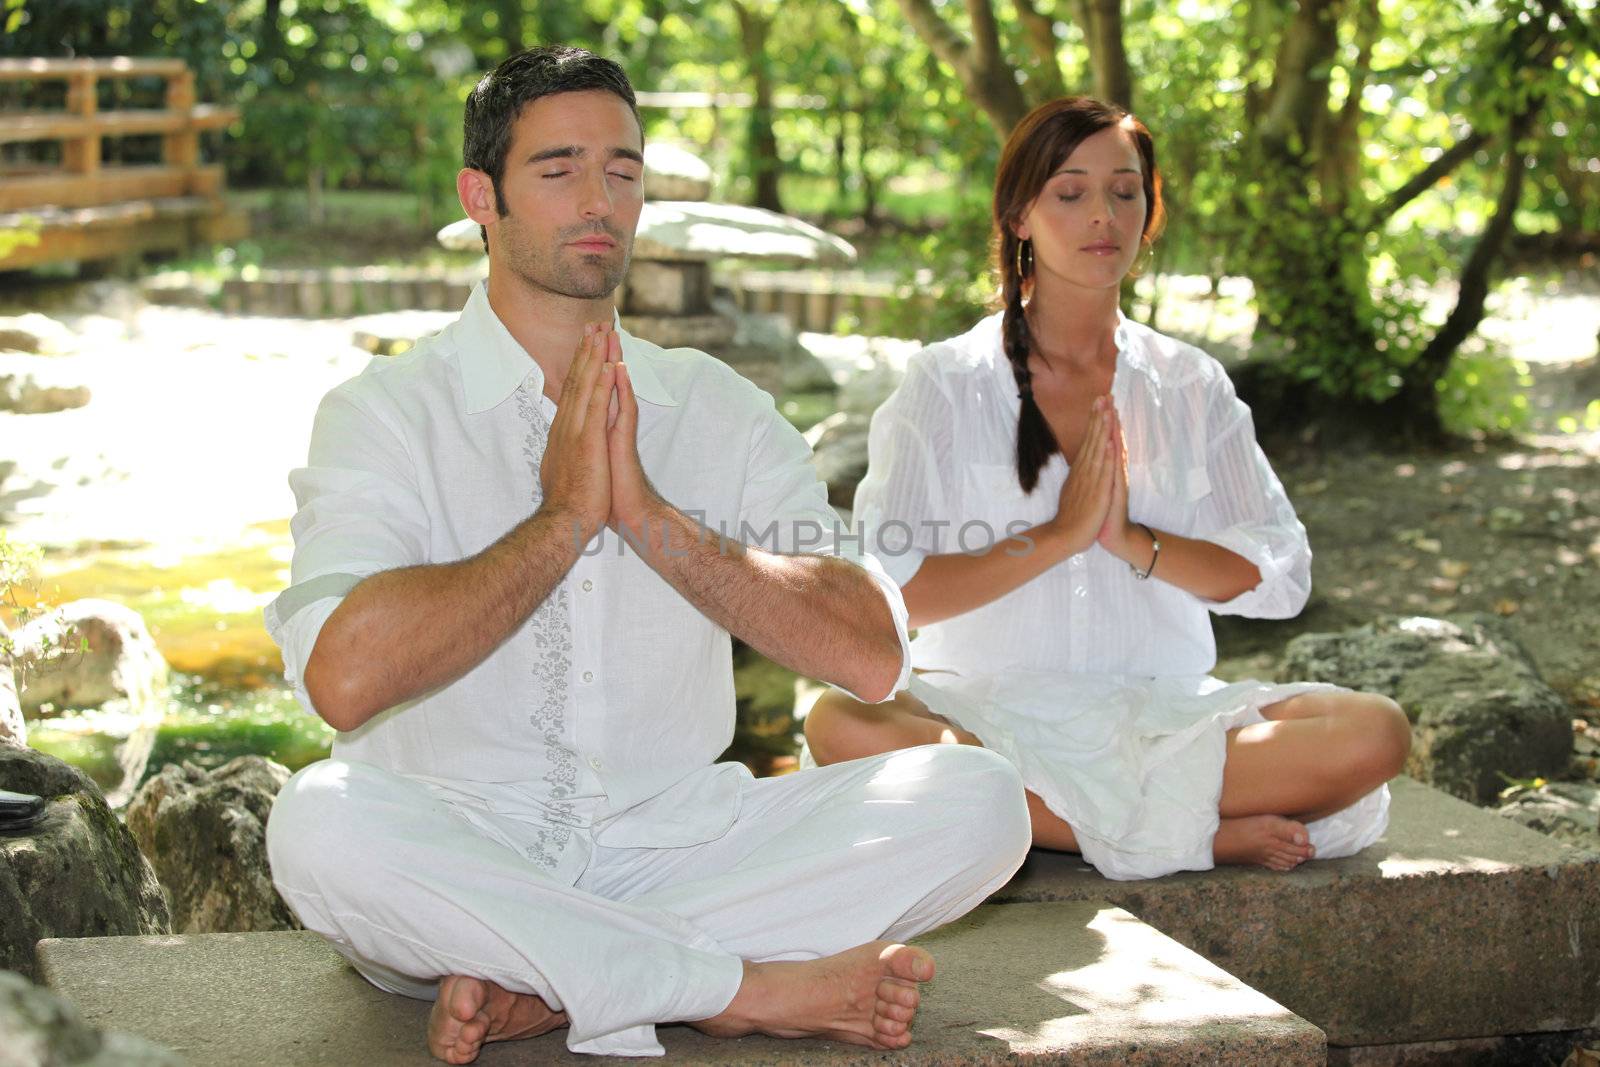 Couple doing relaxation exercises by phovoir